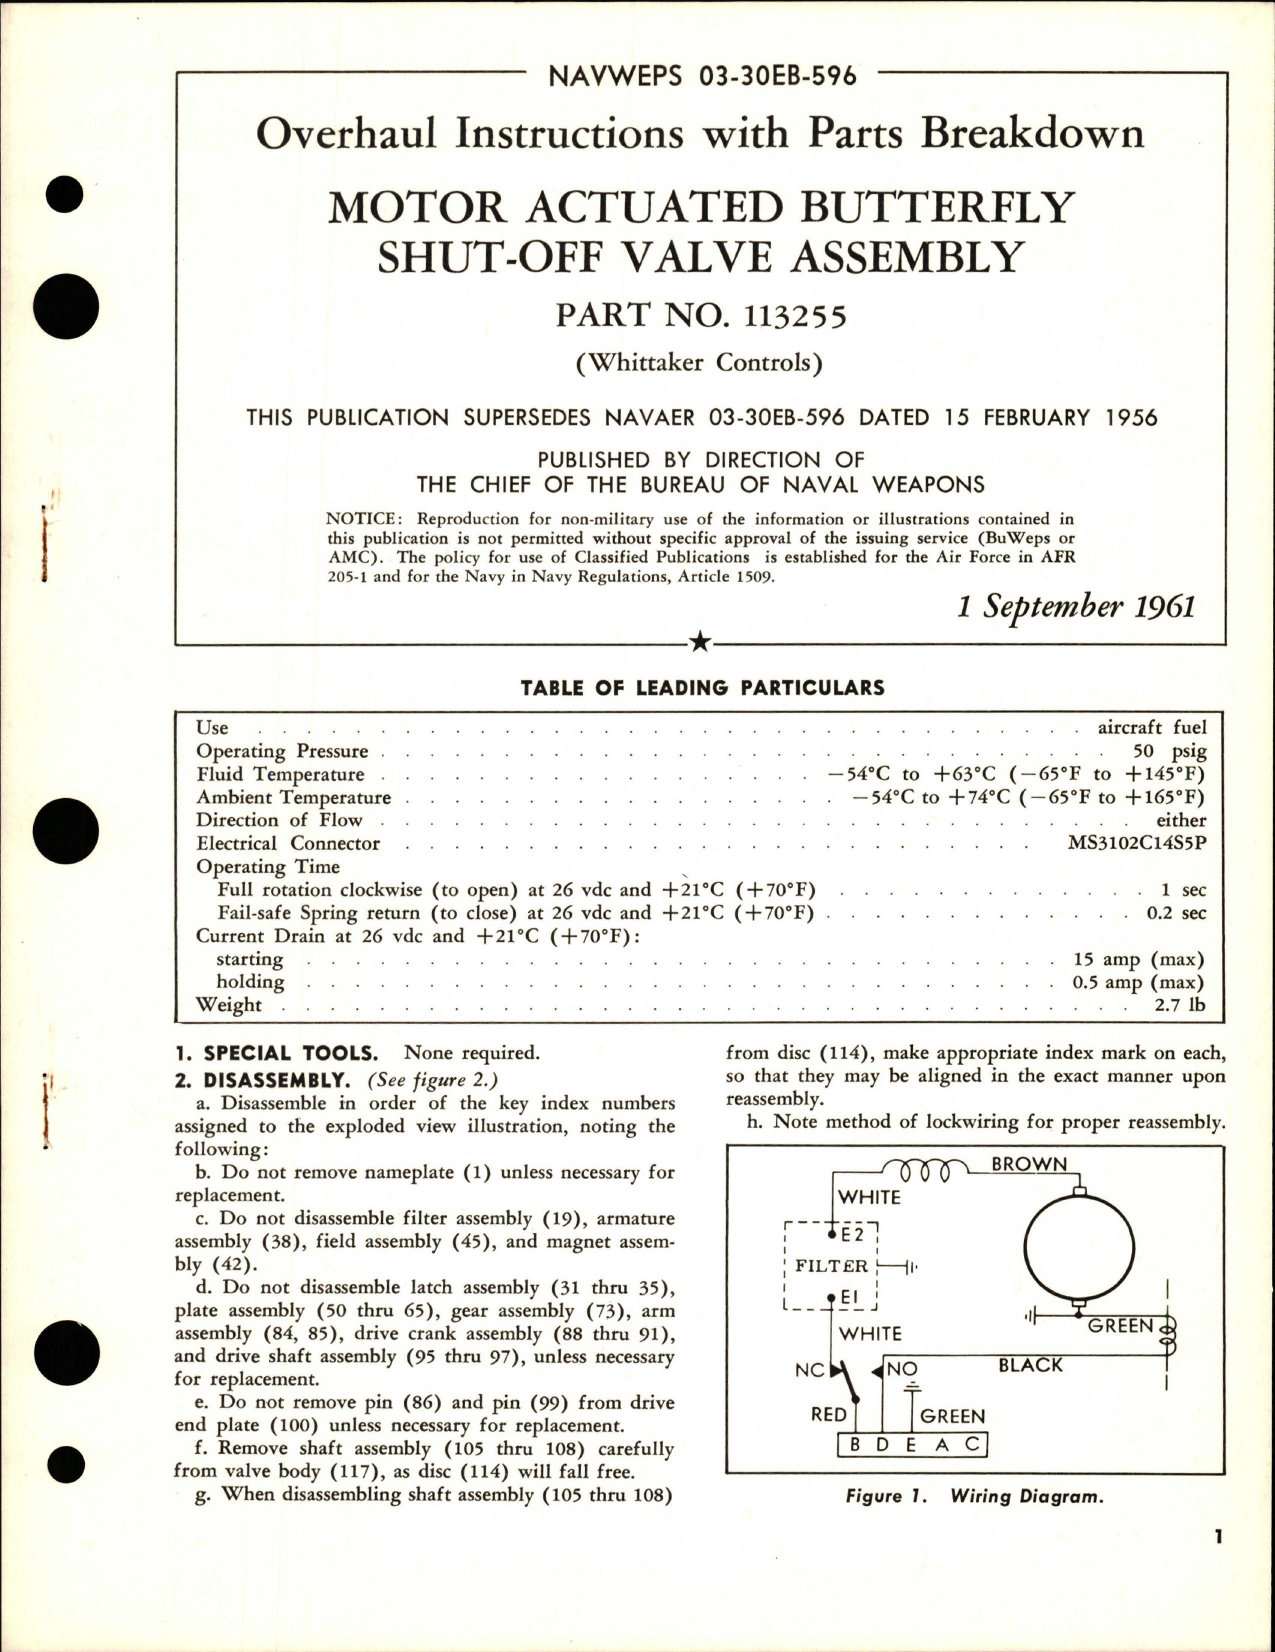 Sample page 1 from AirCorps Library document: Overhaul Instructions with Oarts Breakdown for Motor Actuated Butterfly Shut Off Valve Assemblyy - Part 113255